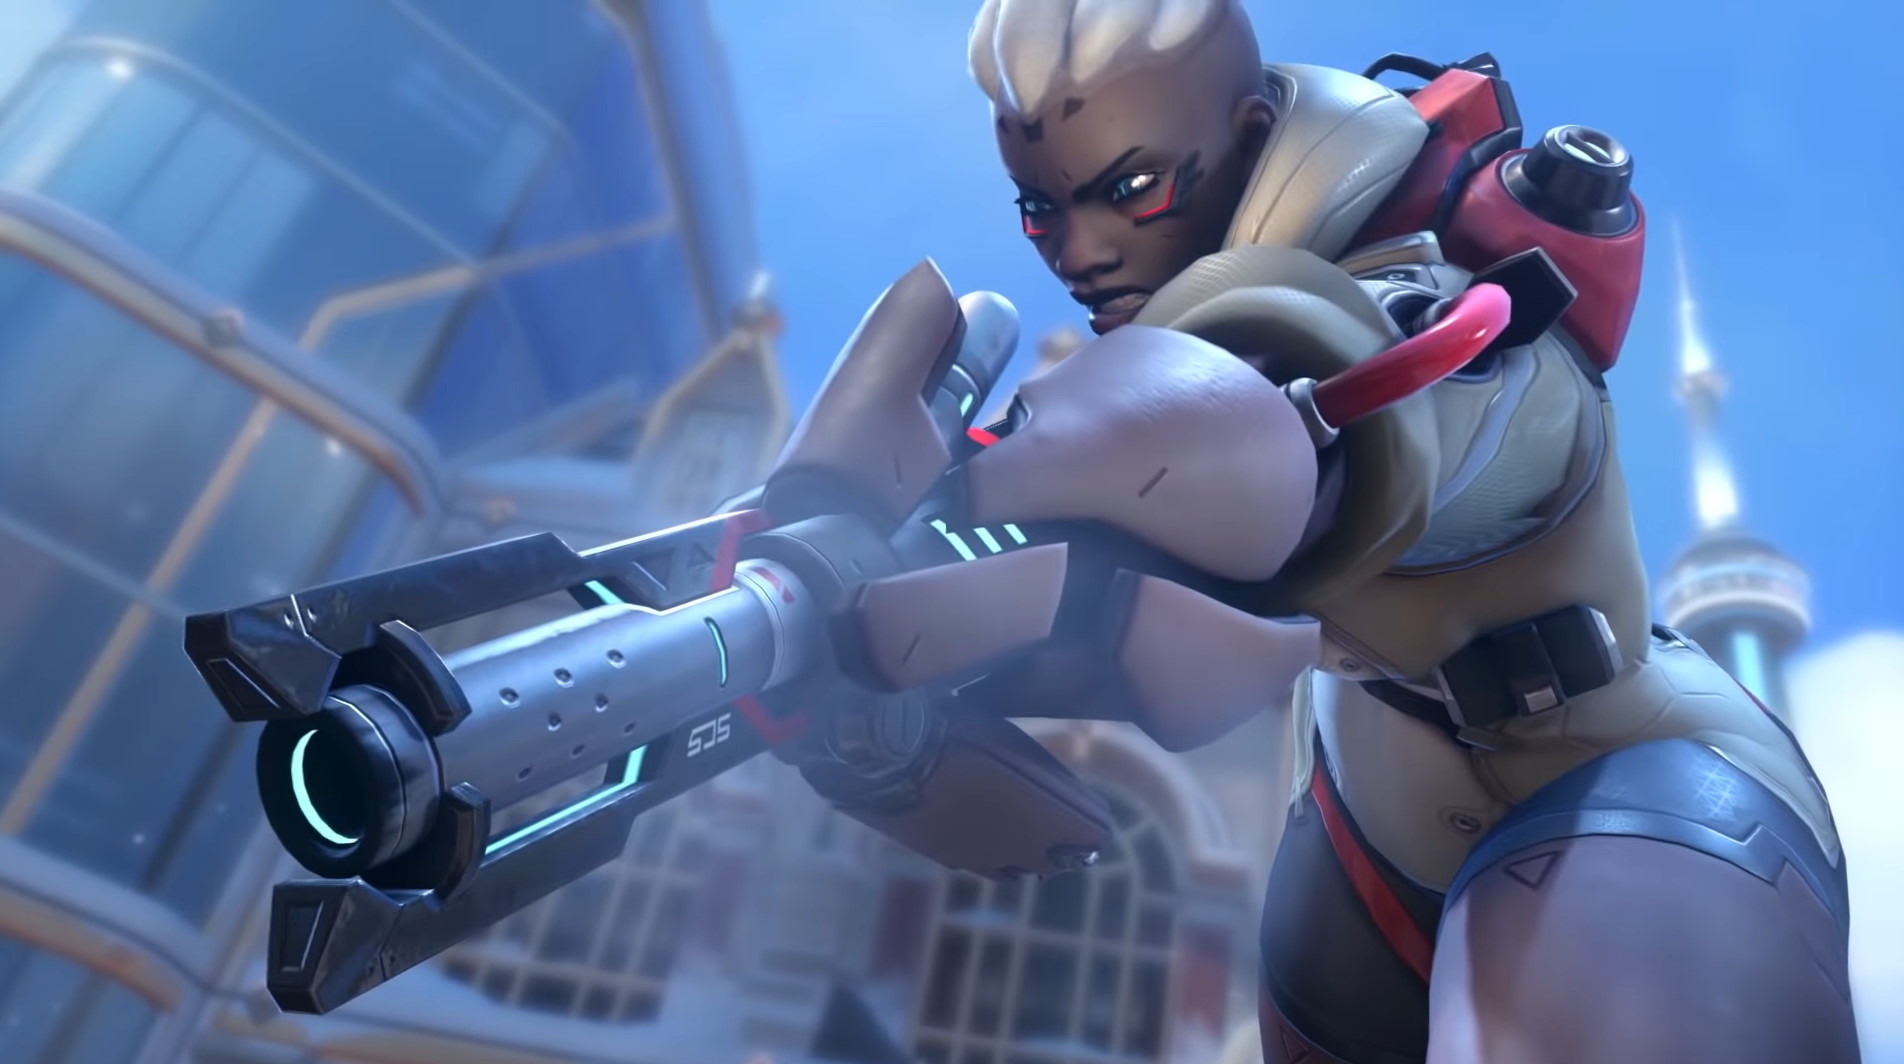 Overwatch 2 is questioning if one-shot kills belong, starting with Roadhog